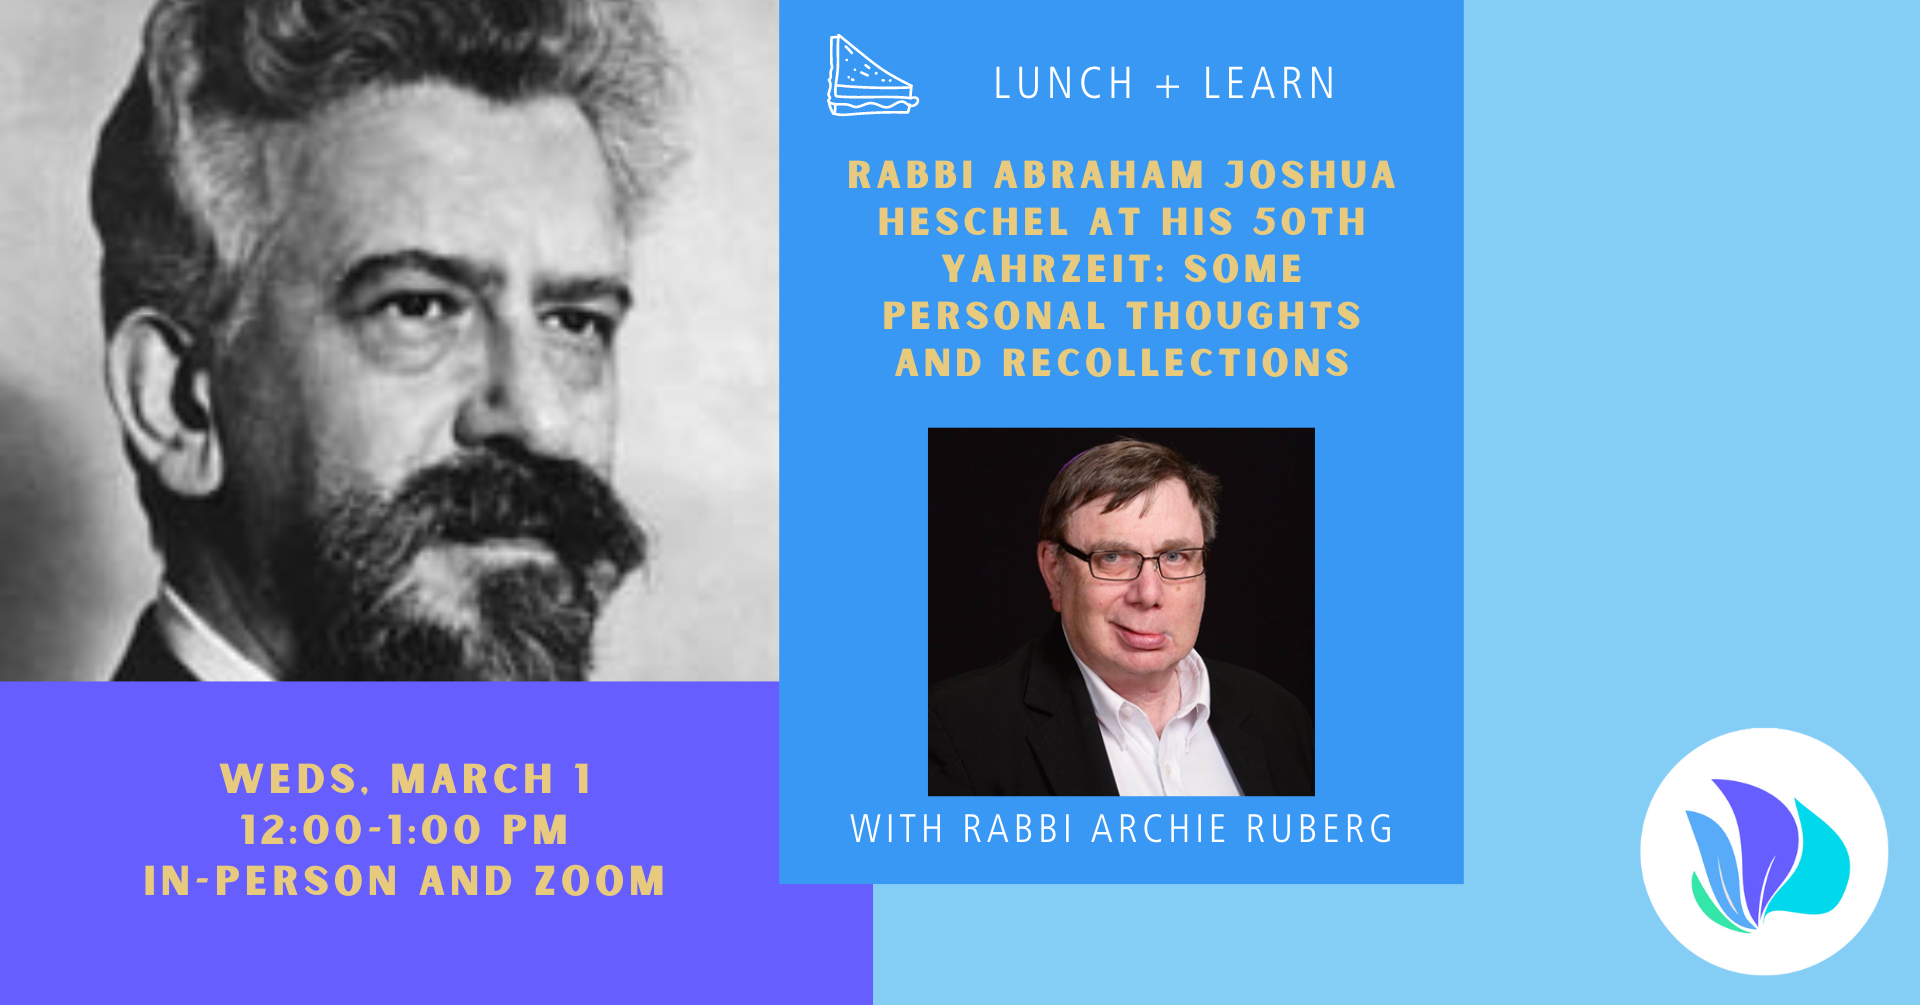 [Lunch & Learn] Rabbi Abraham Joshua Heschel at his 50th Yahrzeit: Some Personal Thoughts and Recollections